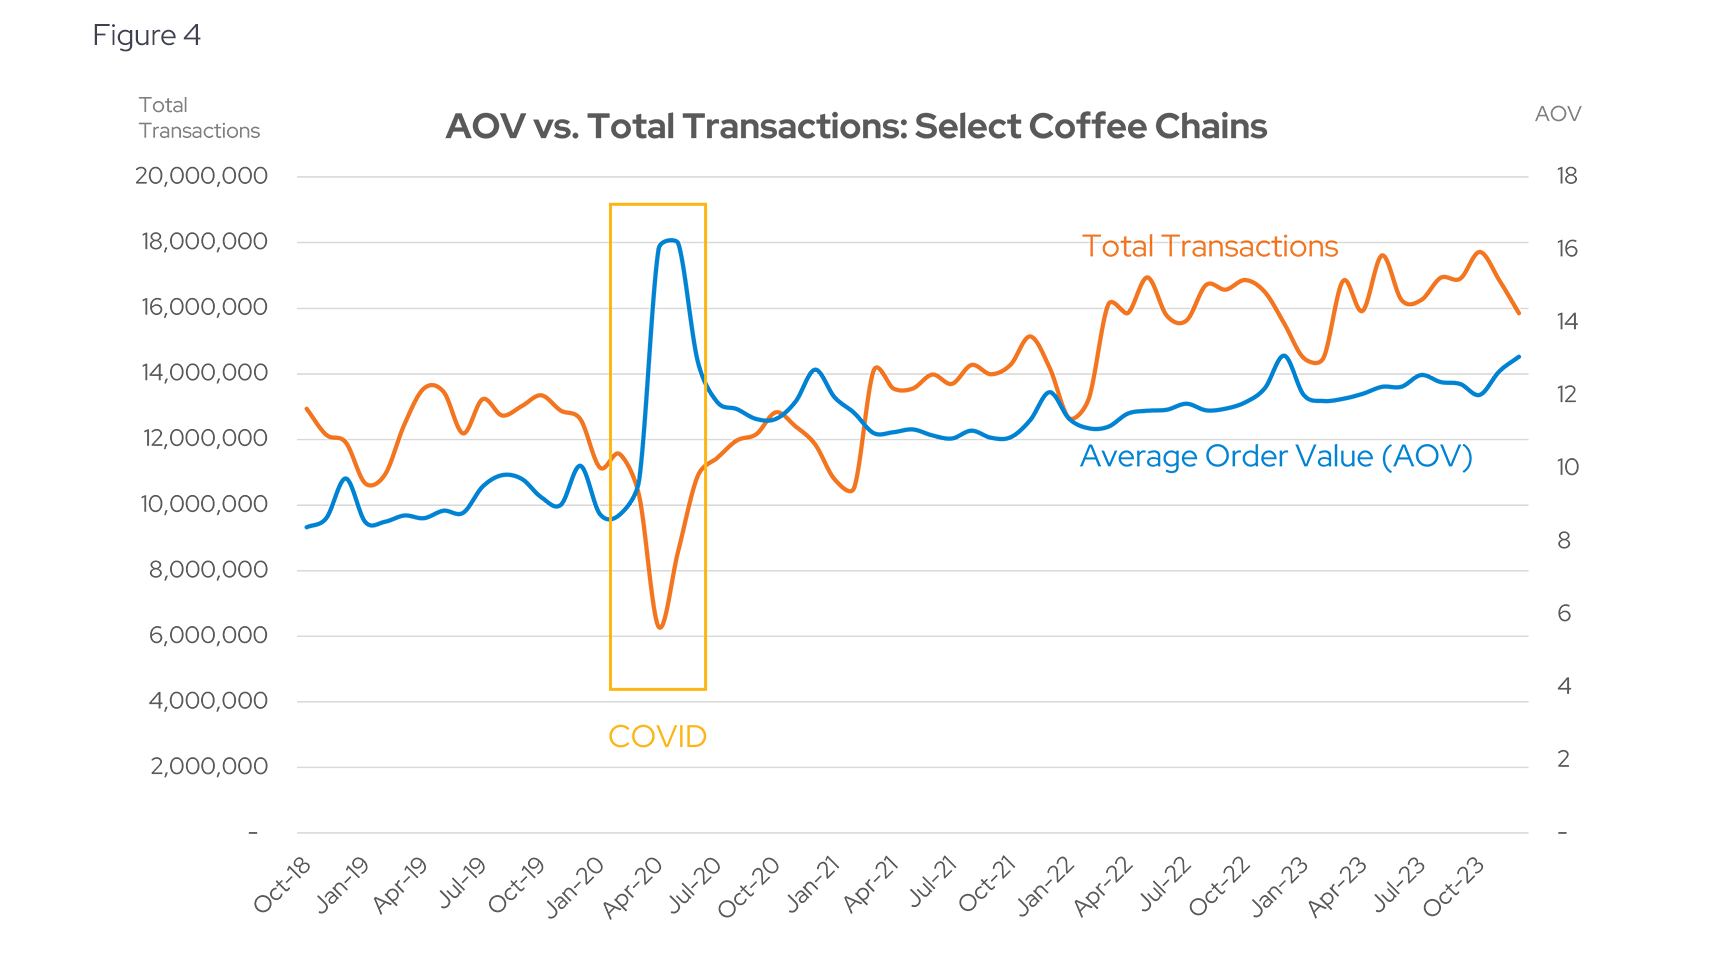 AOV vs. Total Transactions: Select Coffee Chains